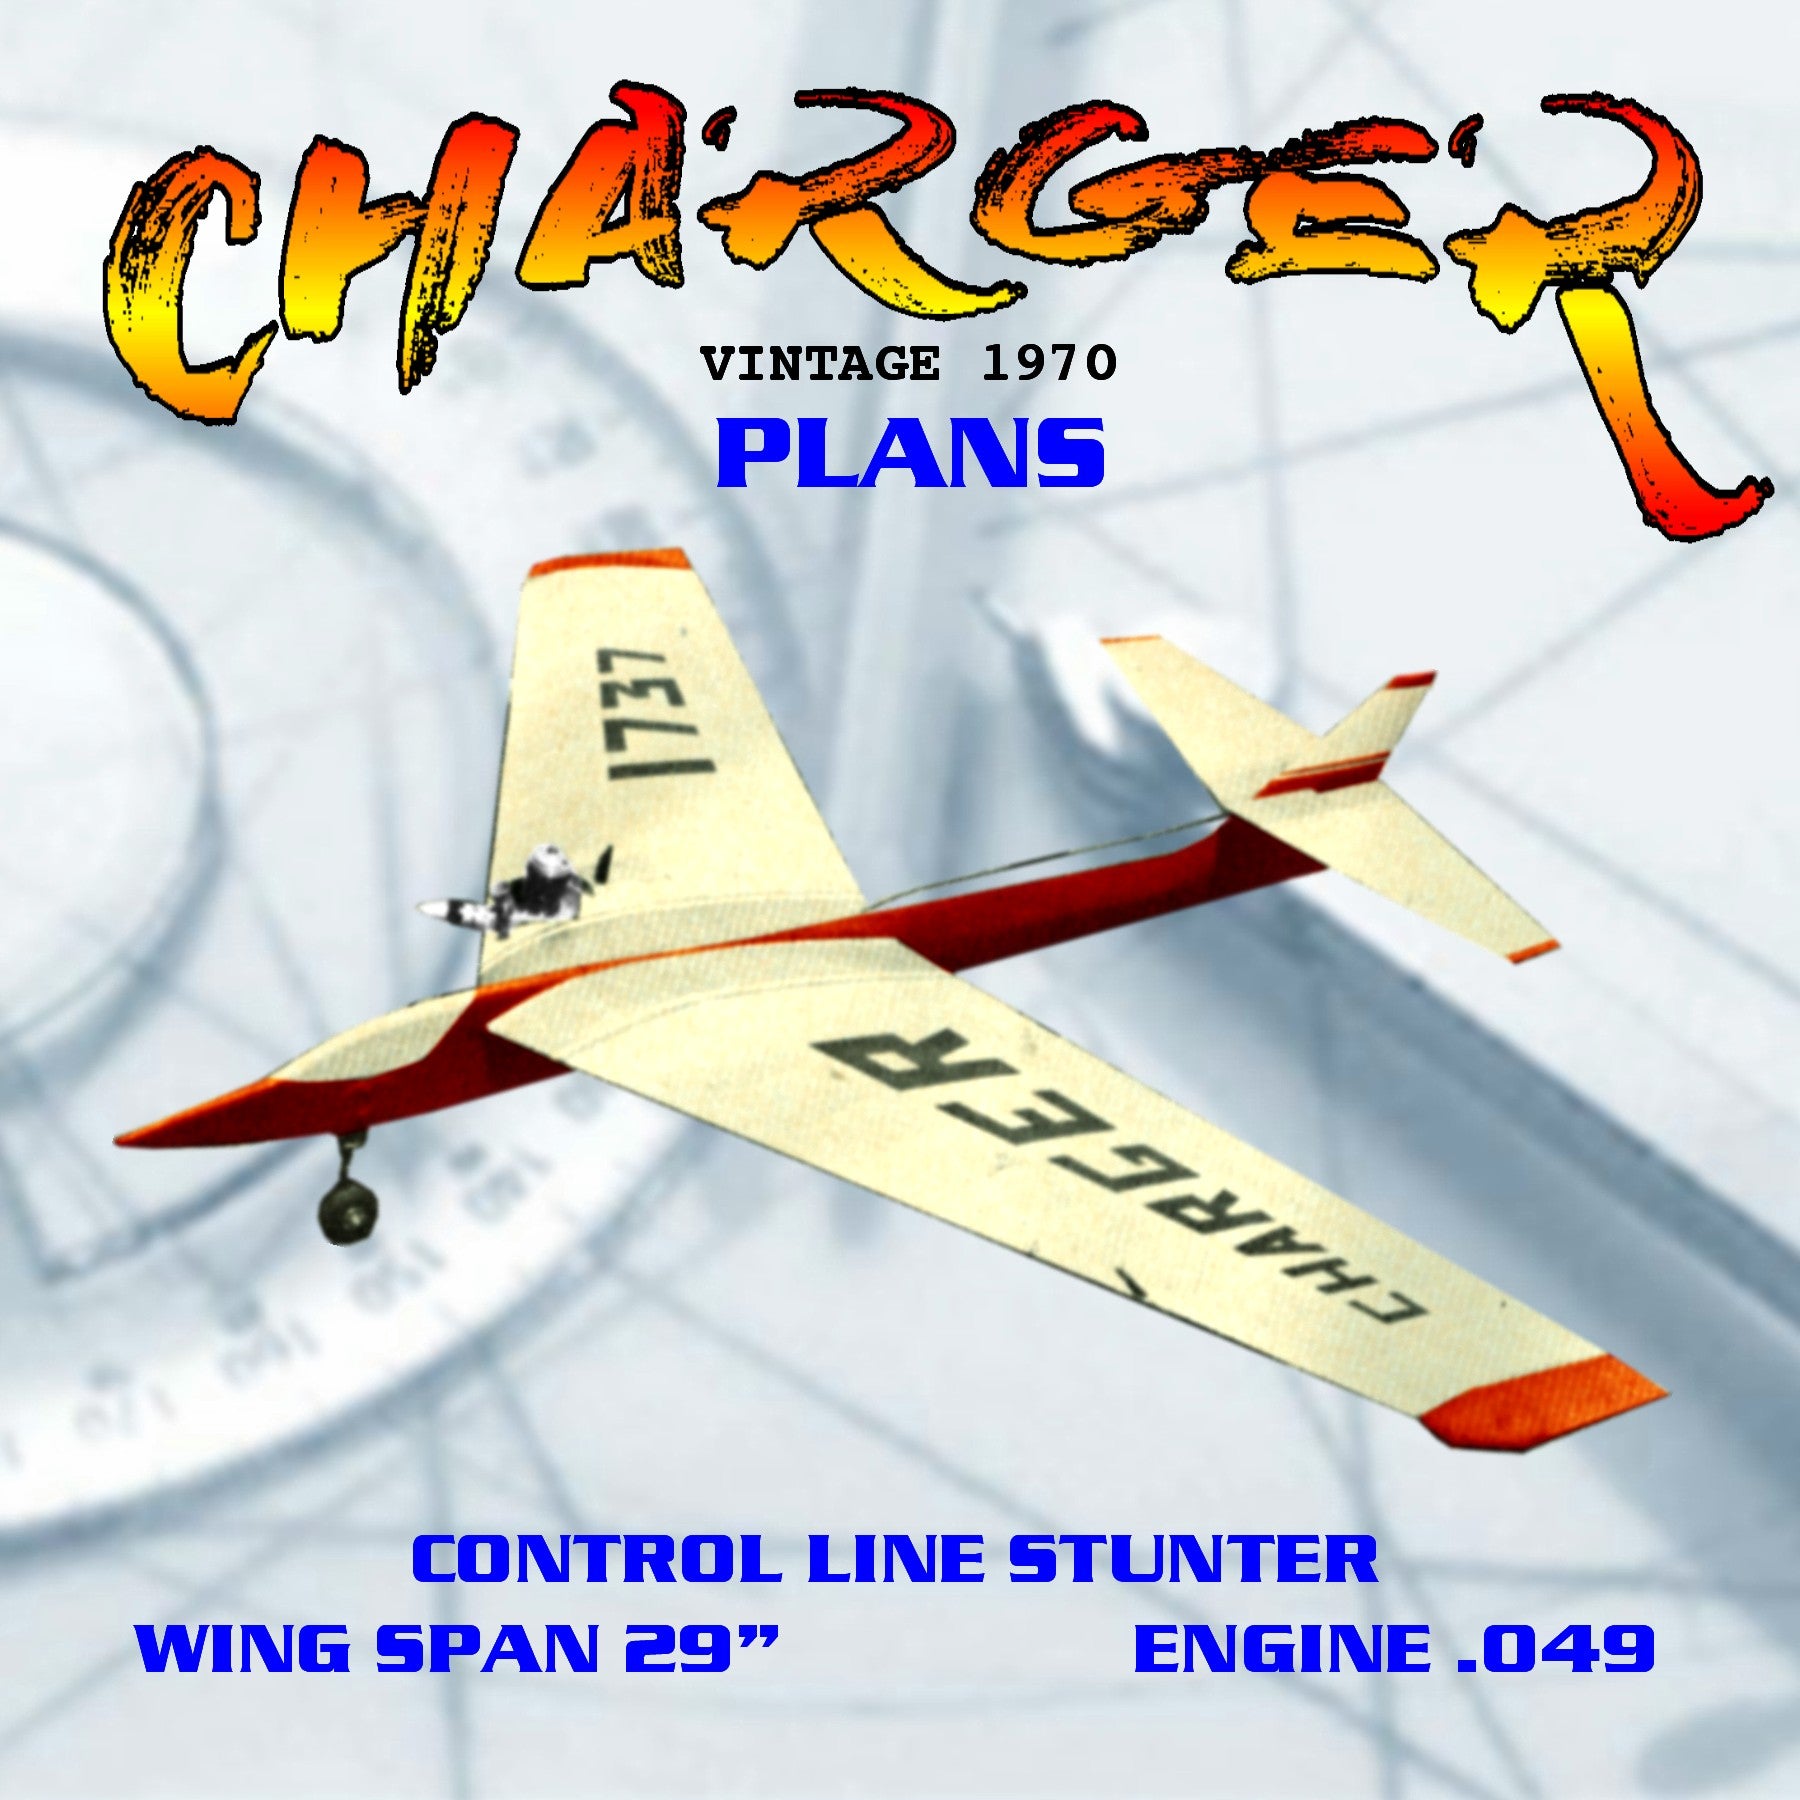 full size printed plan vintage 1970 control line stunter 'charger' 049 swept-wing